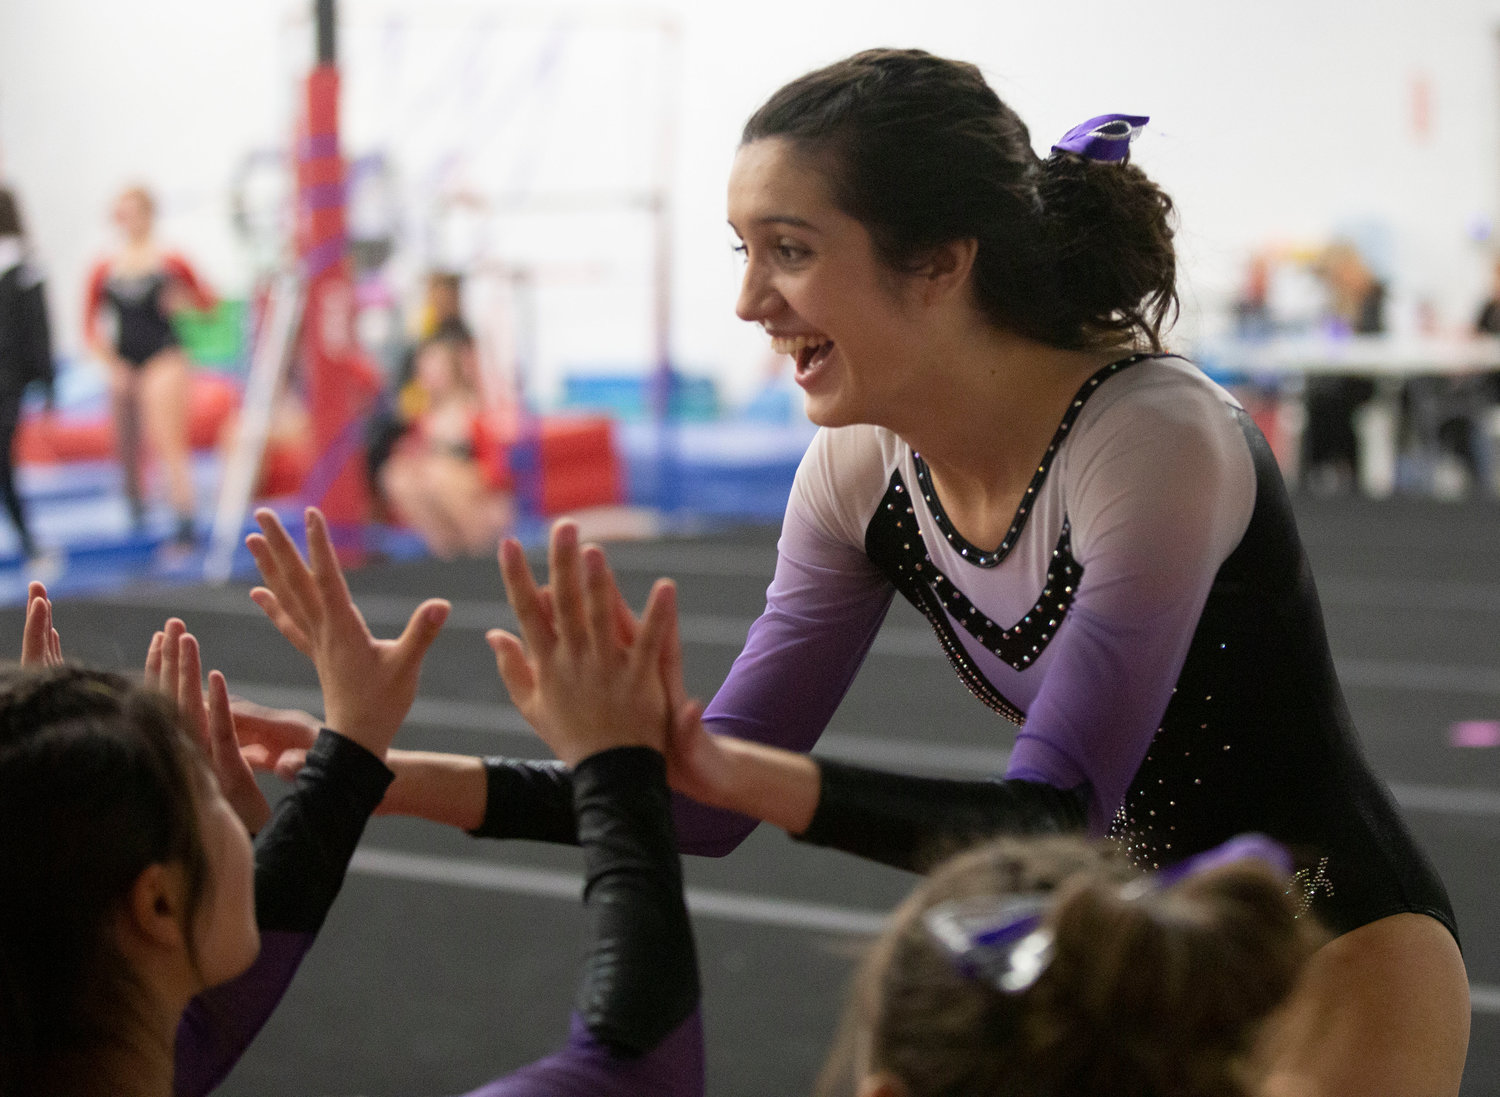 Thalyta Pereira receives high fives after her floor routine.